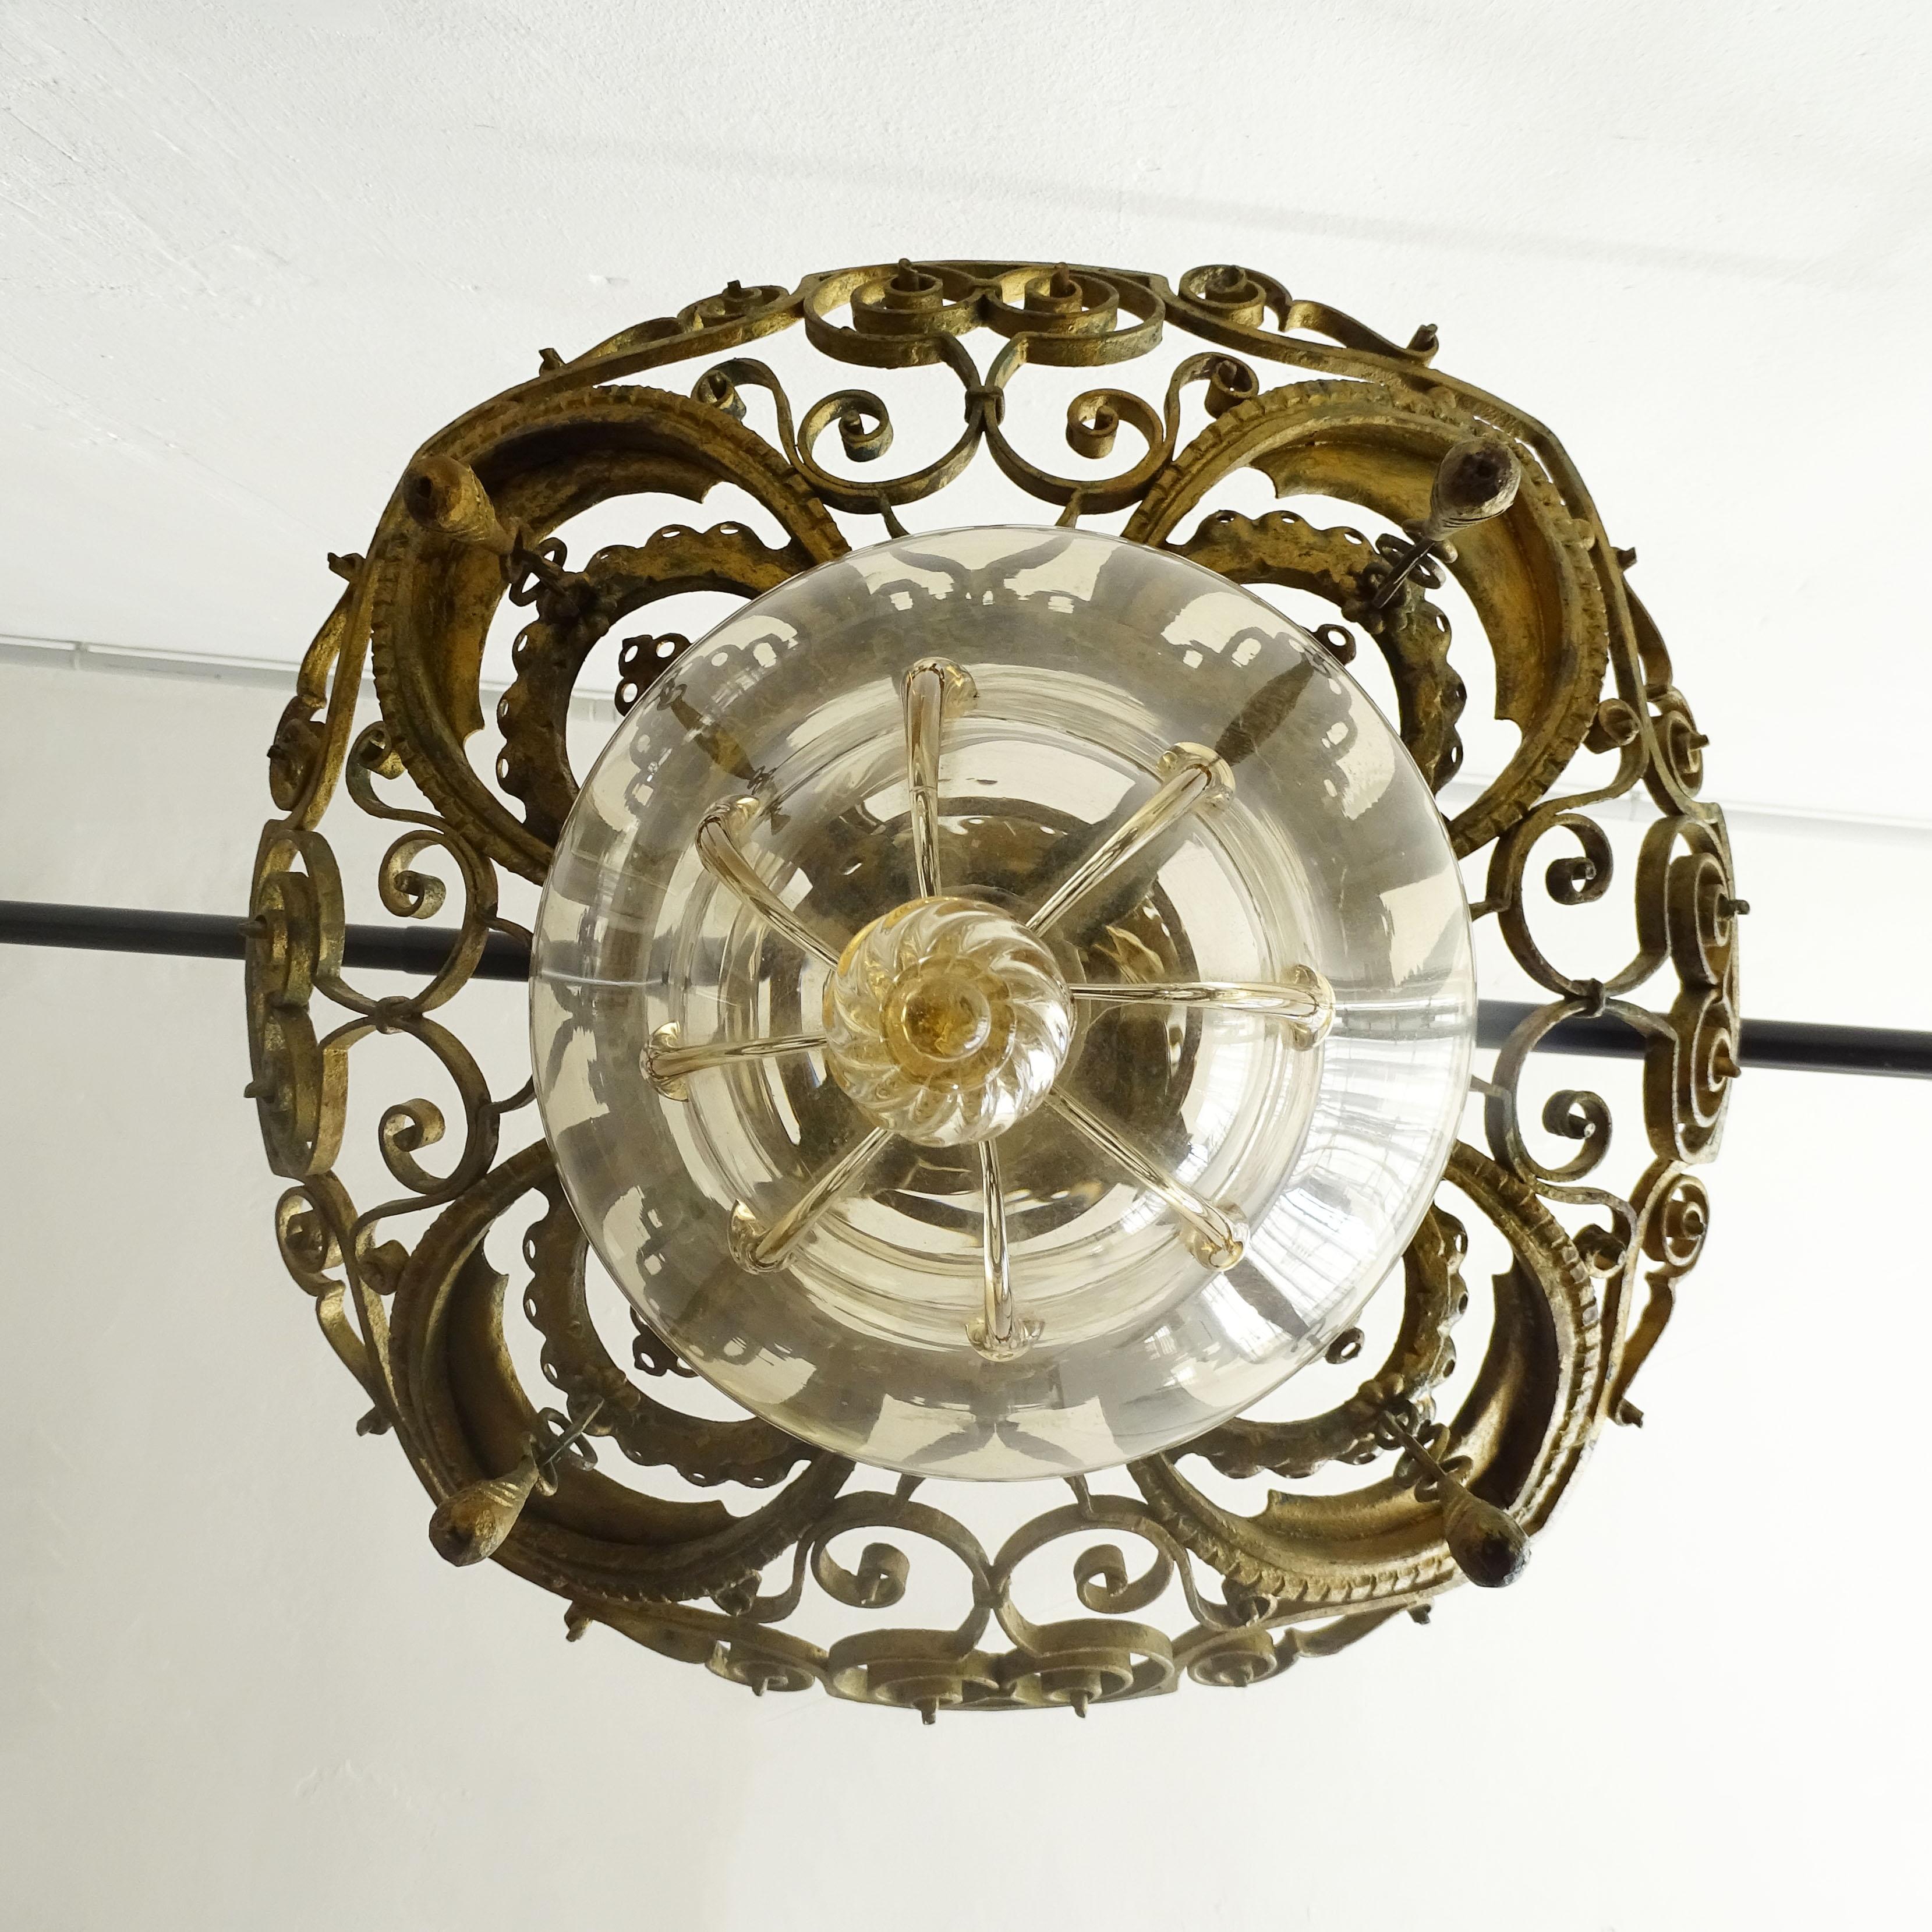 Murano Glass Alessandro Mazzucotelli wrought Iron and Murano glass ceiling lamp, Italy 1920s For Sale